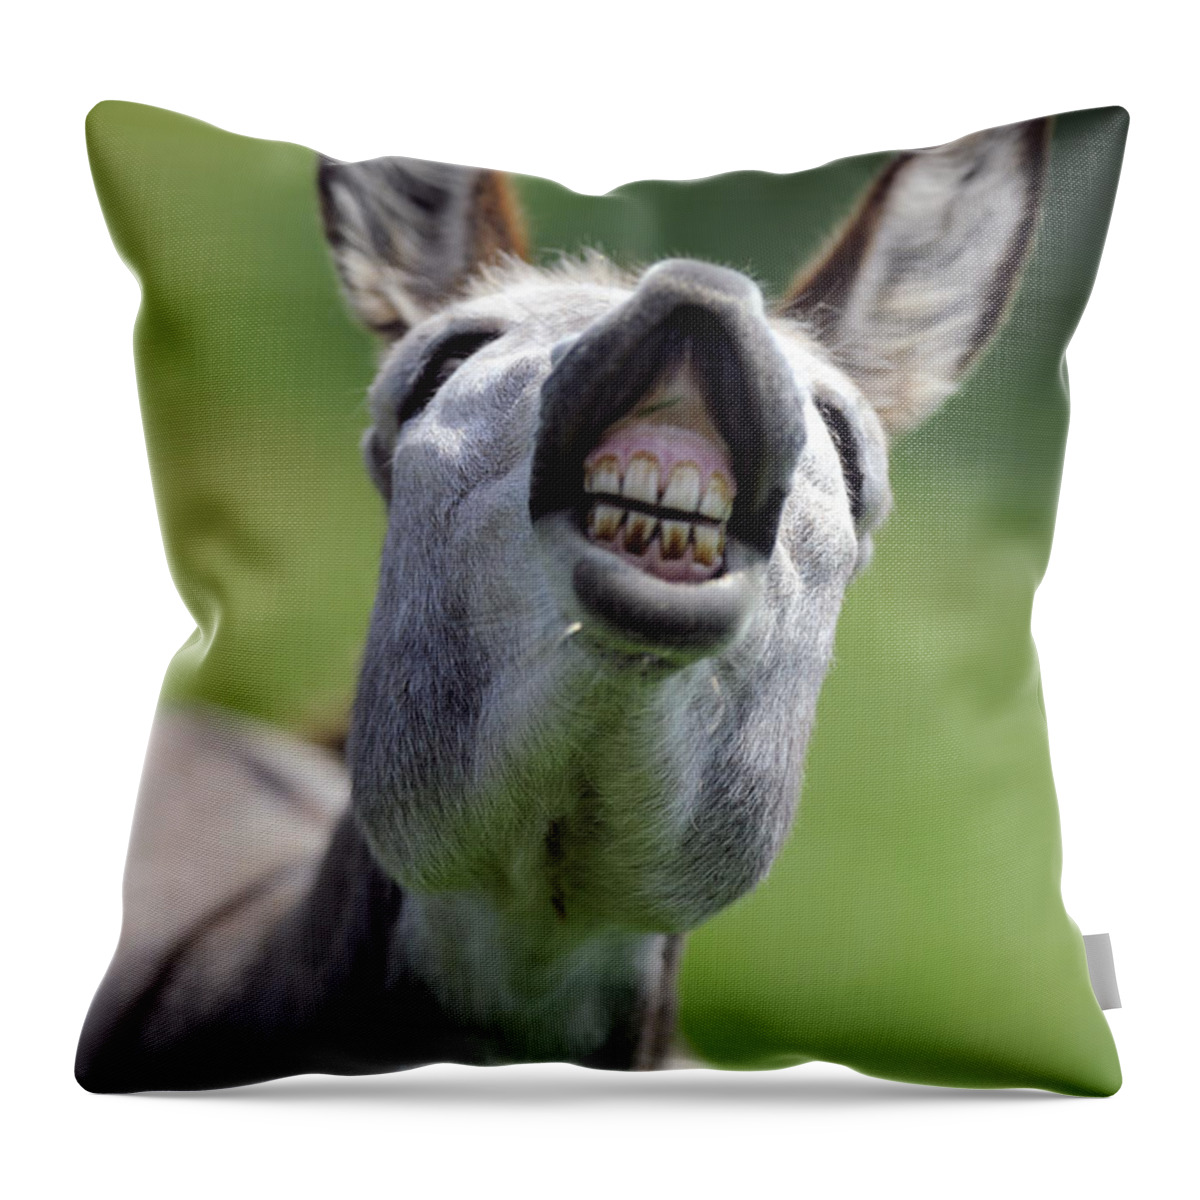 Donkey Throw Pillow featuring the photograph Donkey #2112 by Carien Schippers